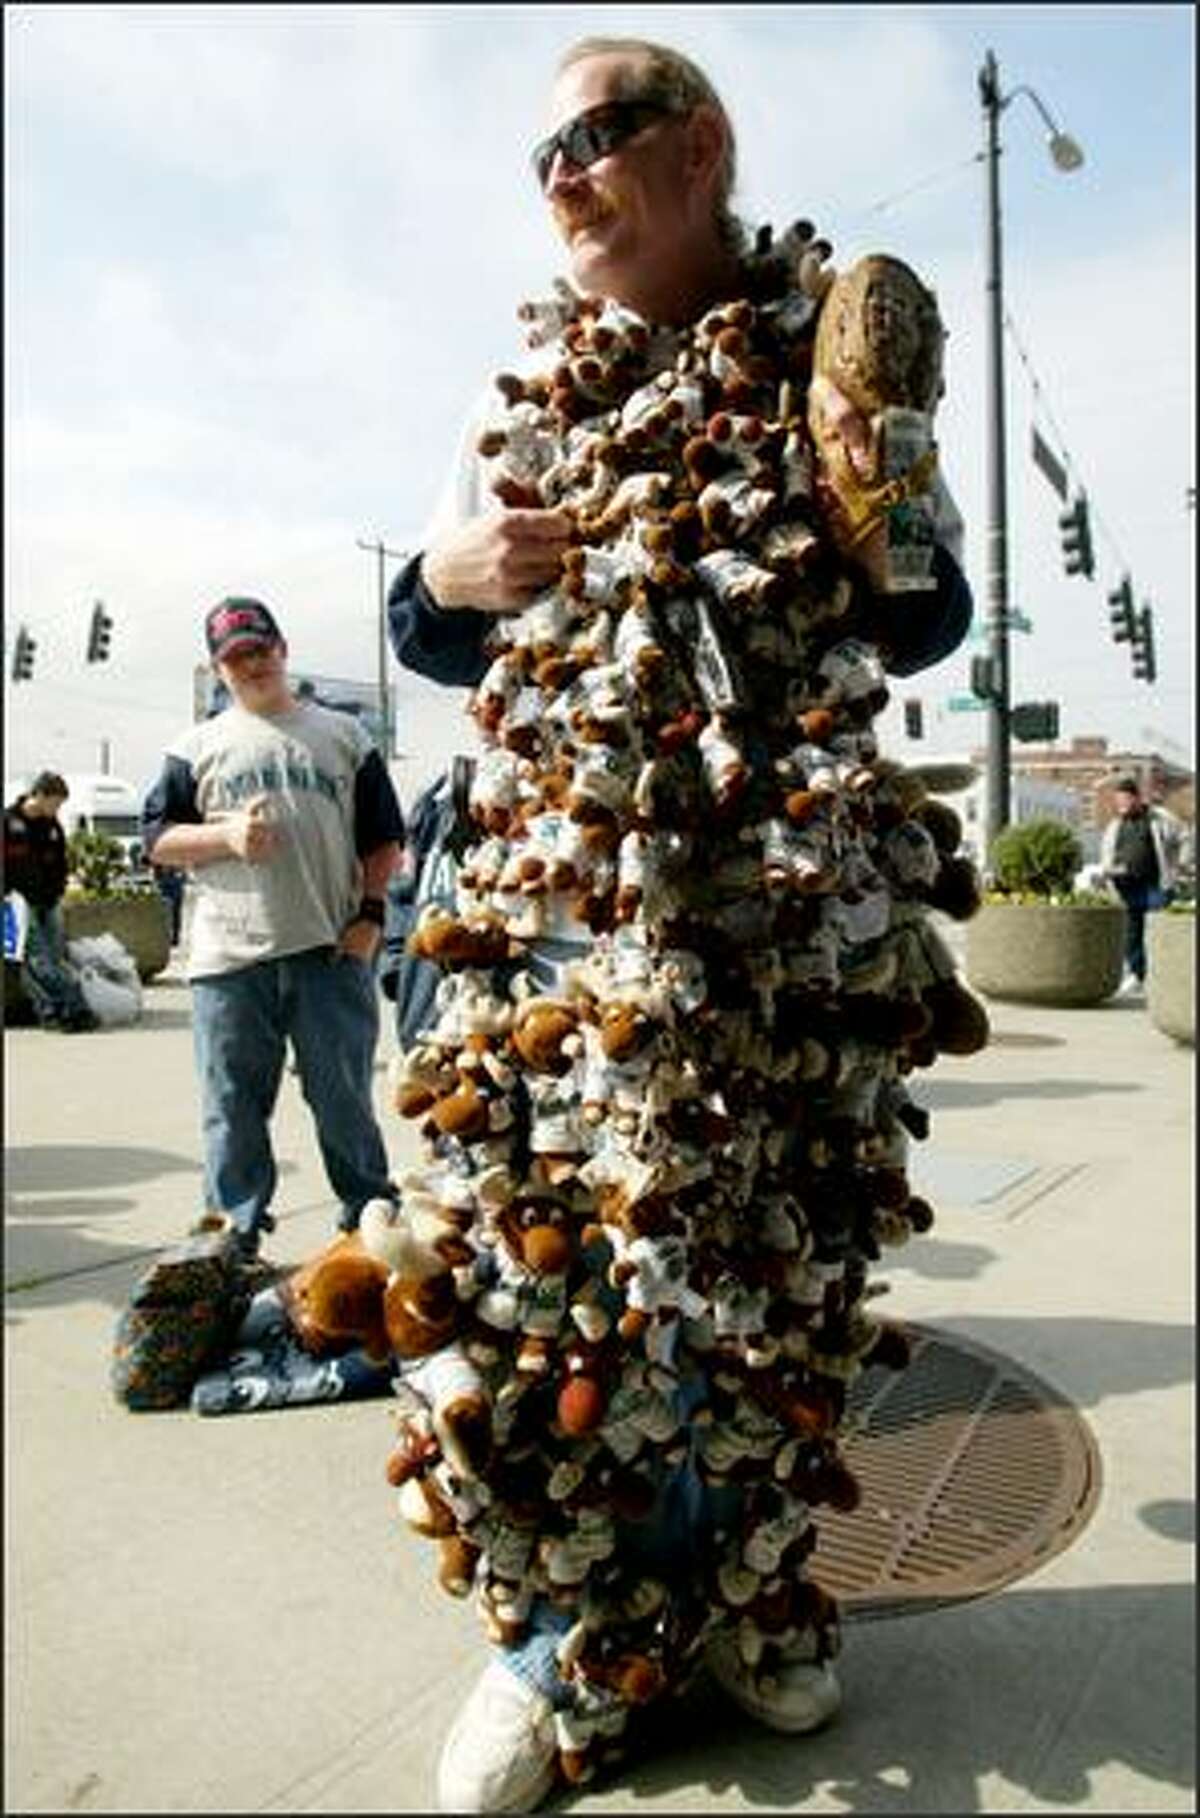 George "The Moose Man" King of Spanaway stands outside the ballpark covered in his "mojo tally" of 103 Mariner Moose dolls. King started collecting in 2000 and he buys a doll at each game he attends. If the M's win, he keeps the doll; if they lose, he finds a kid who is not having a happy day and presents it to the child.